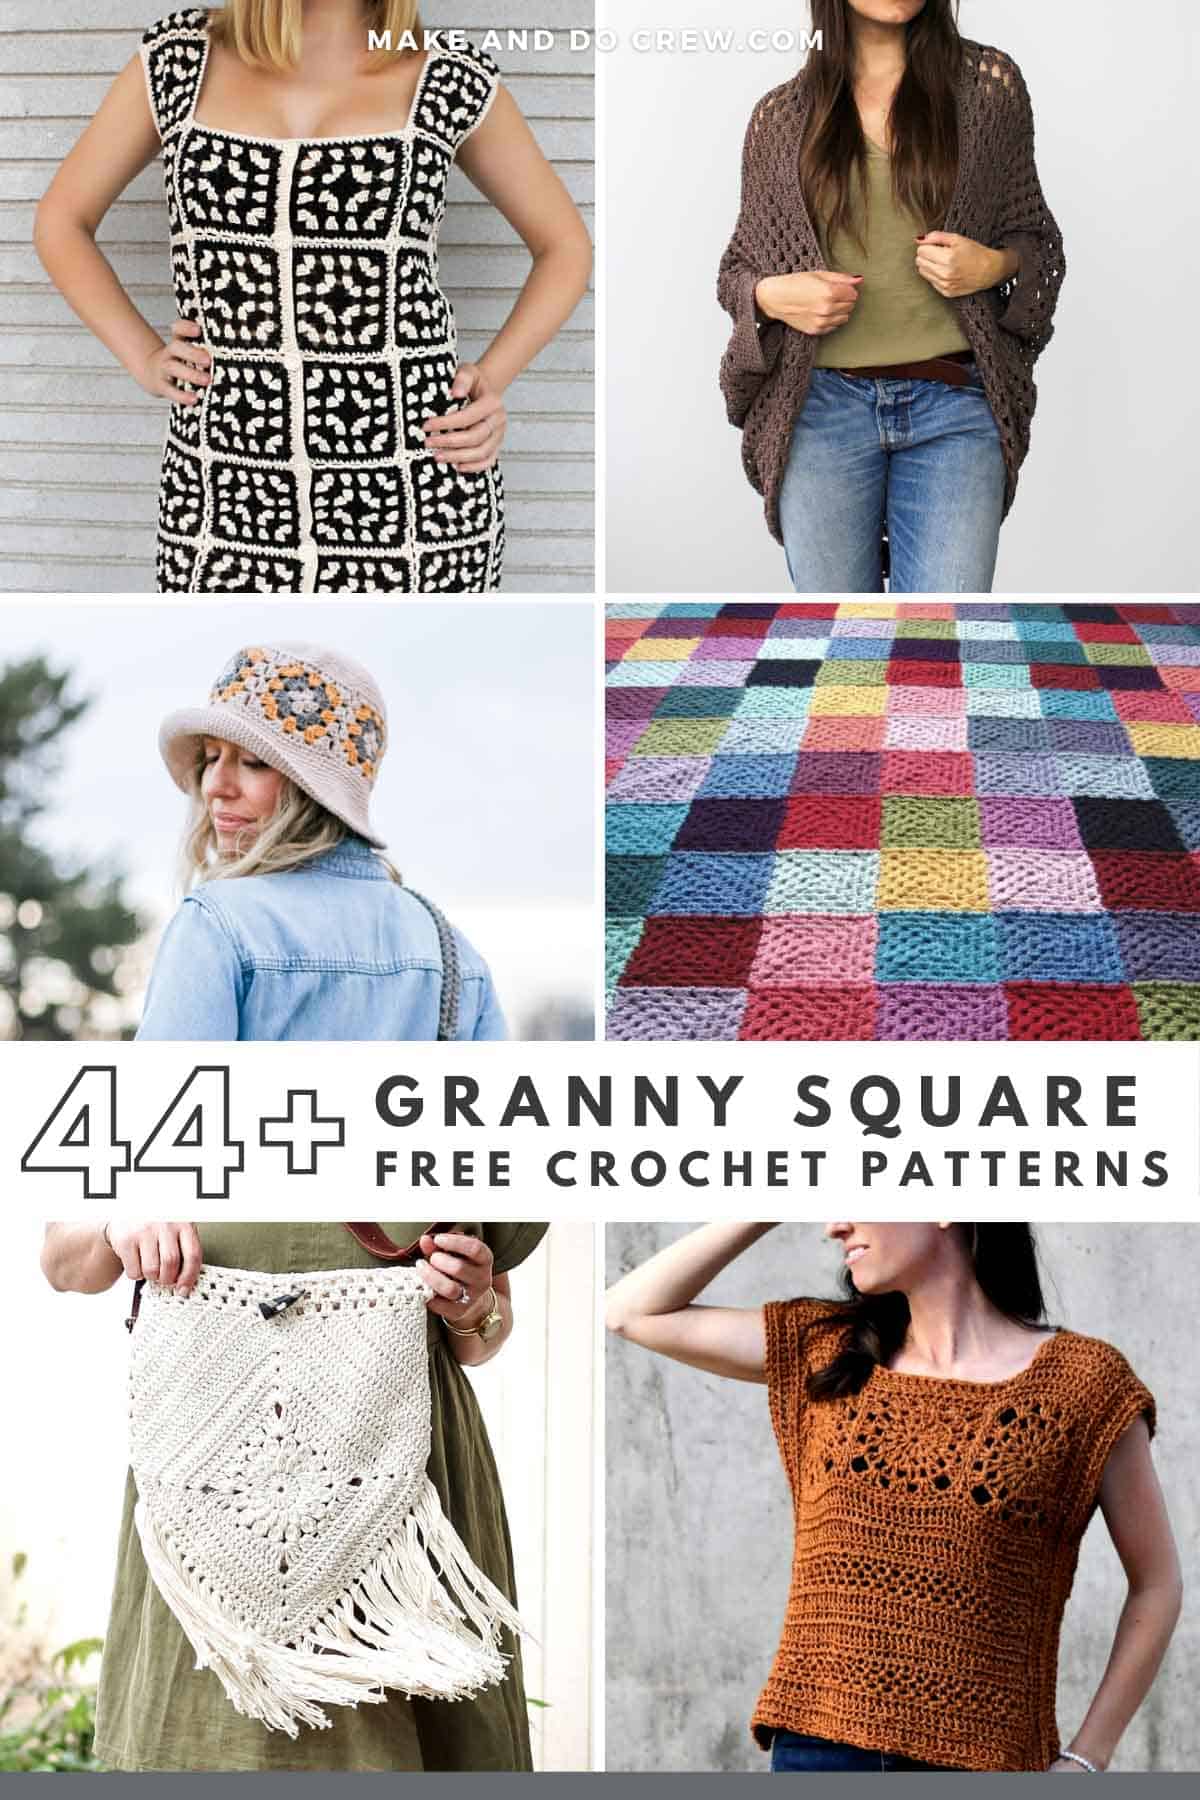 Grid of six granny square crochet projects including a purse, top, dress, bucket hat and blanket.